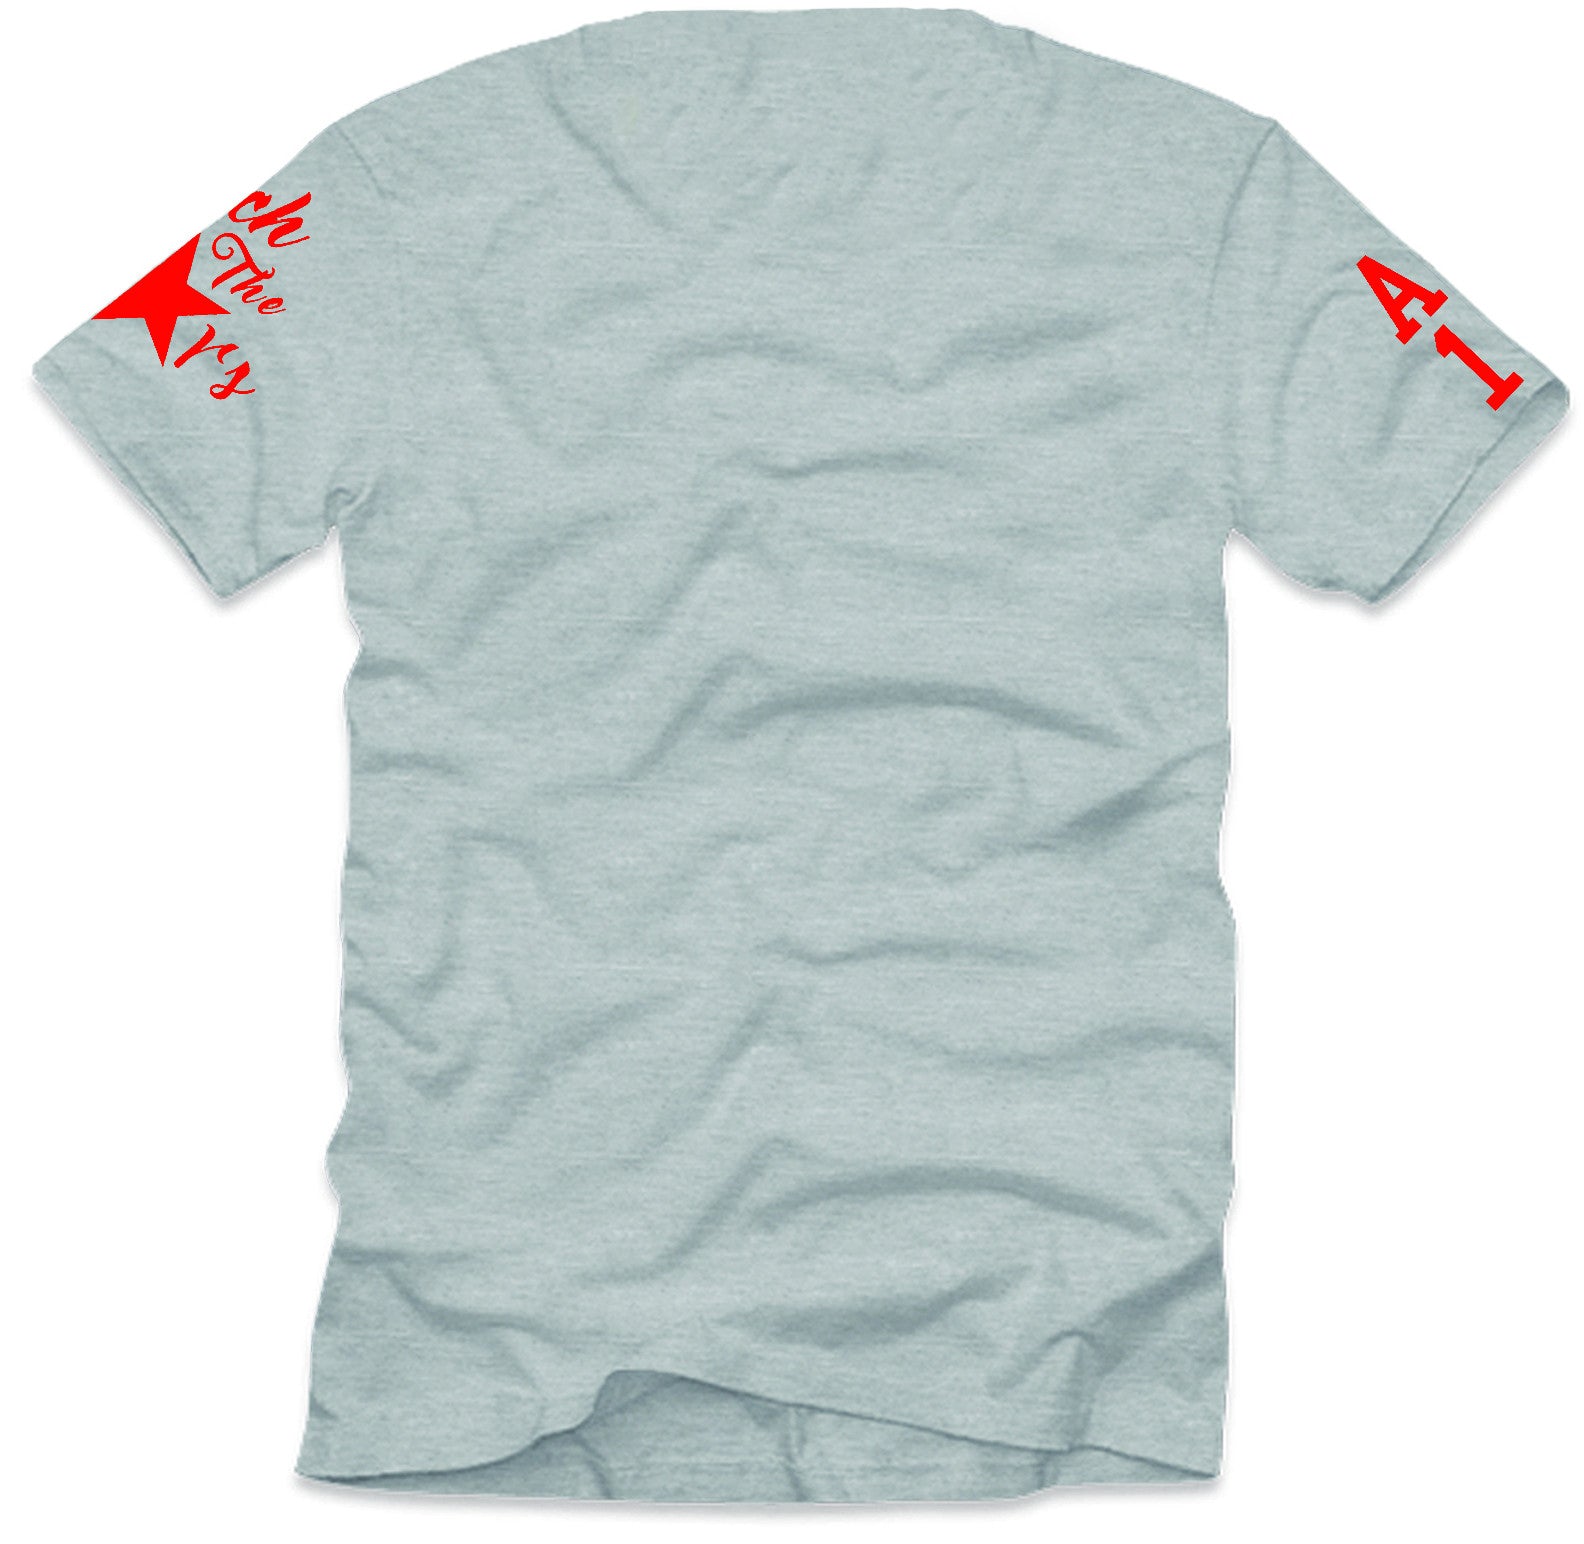 OG Space Age Clothing Co. T- Shirt Grey / Red